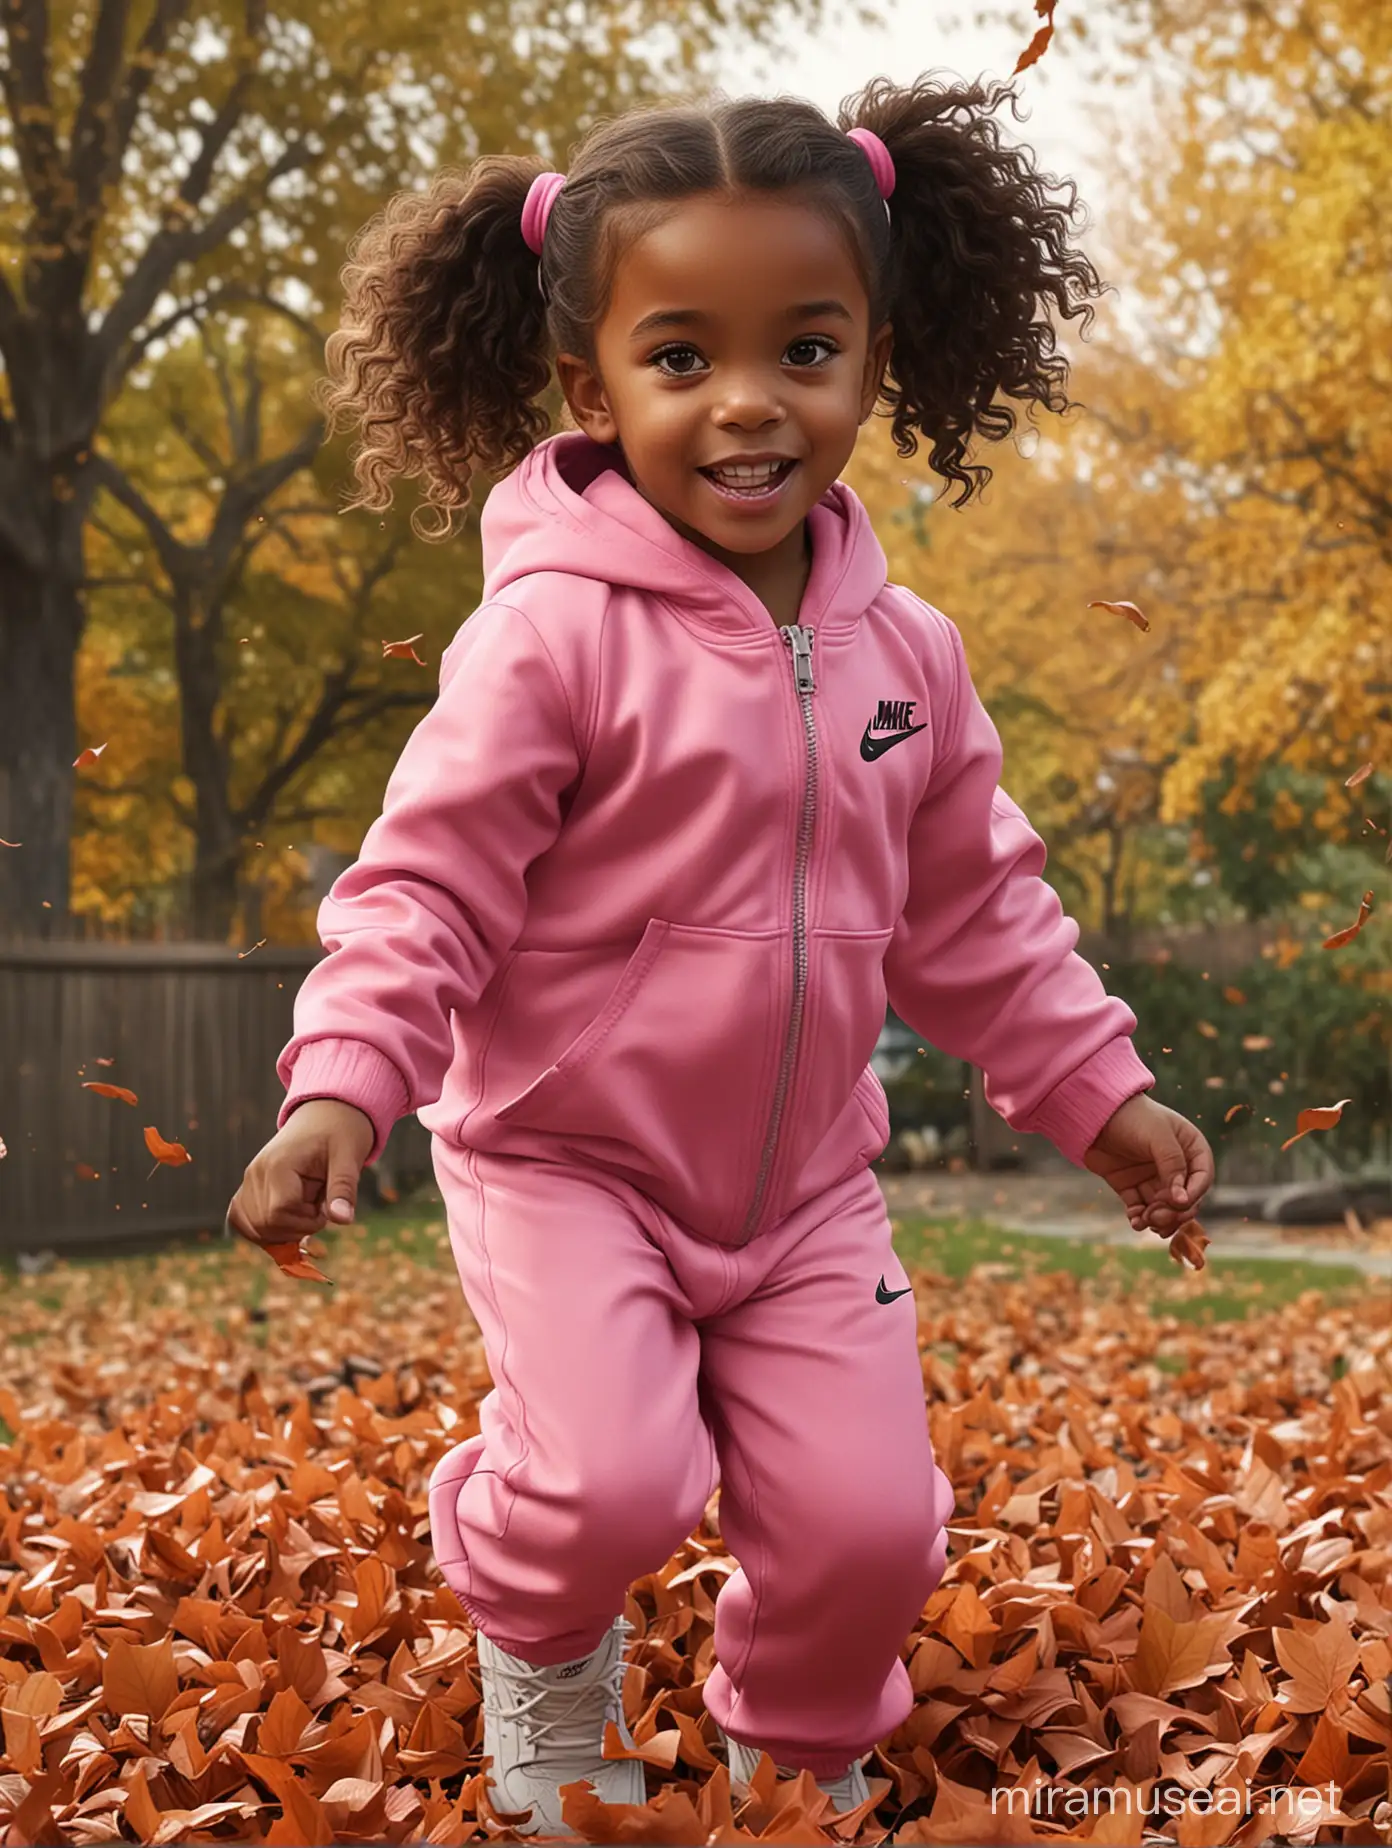 create a hyper realistic african american little  girl with long dark curly pigtails brown eyes dressed in a Nike pink wind suit and Jordan’s jumping into a pile of leaves in her backyard, her face shows joy and excitement, her Rottweiler puppy jumps in with her. highly detailed. uhd image, natural beauty realistic shot.hyper hd detailed.4k. --s 1000 --v 6.0